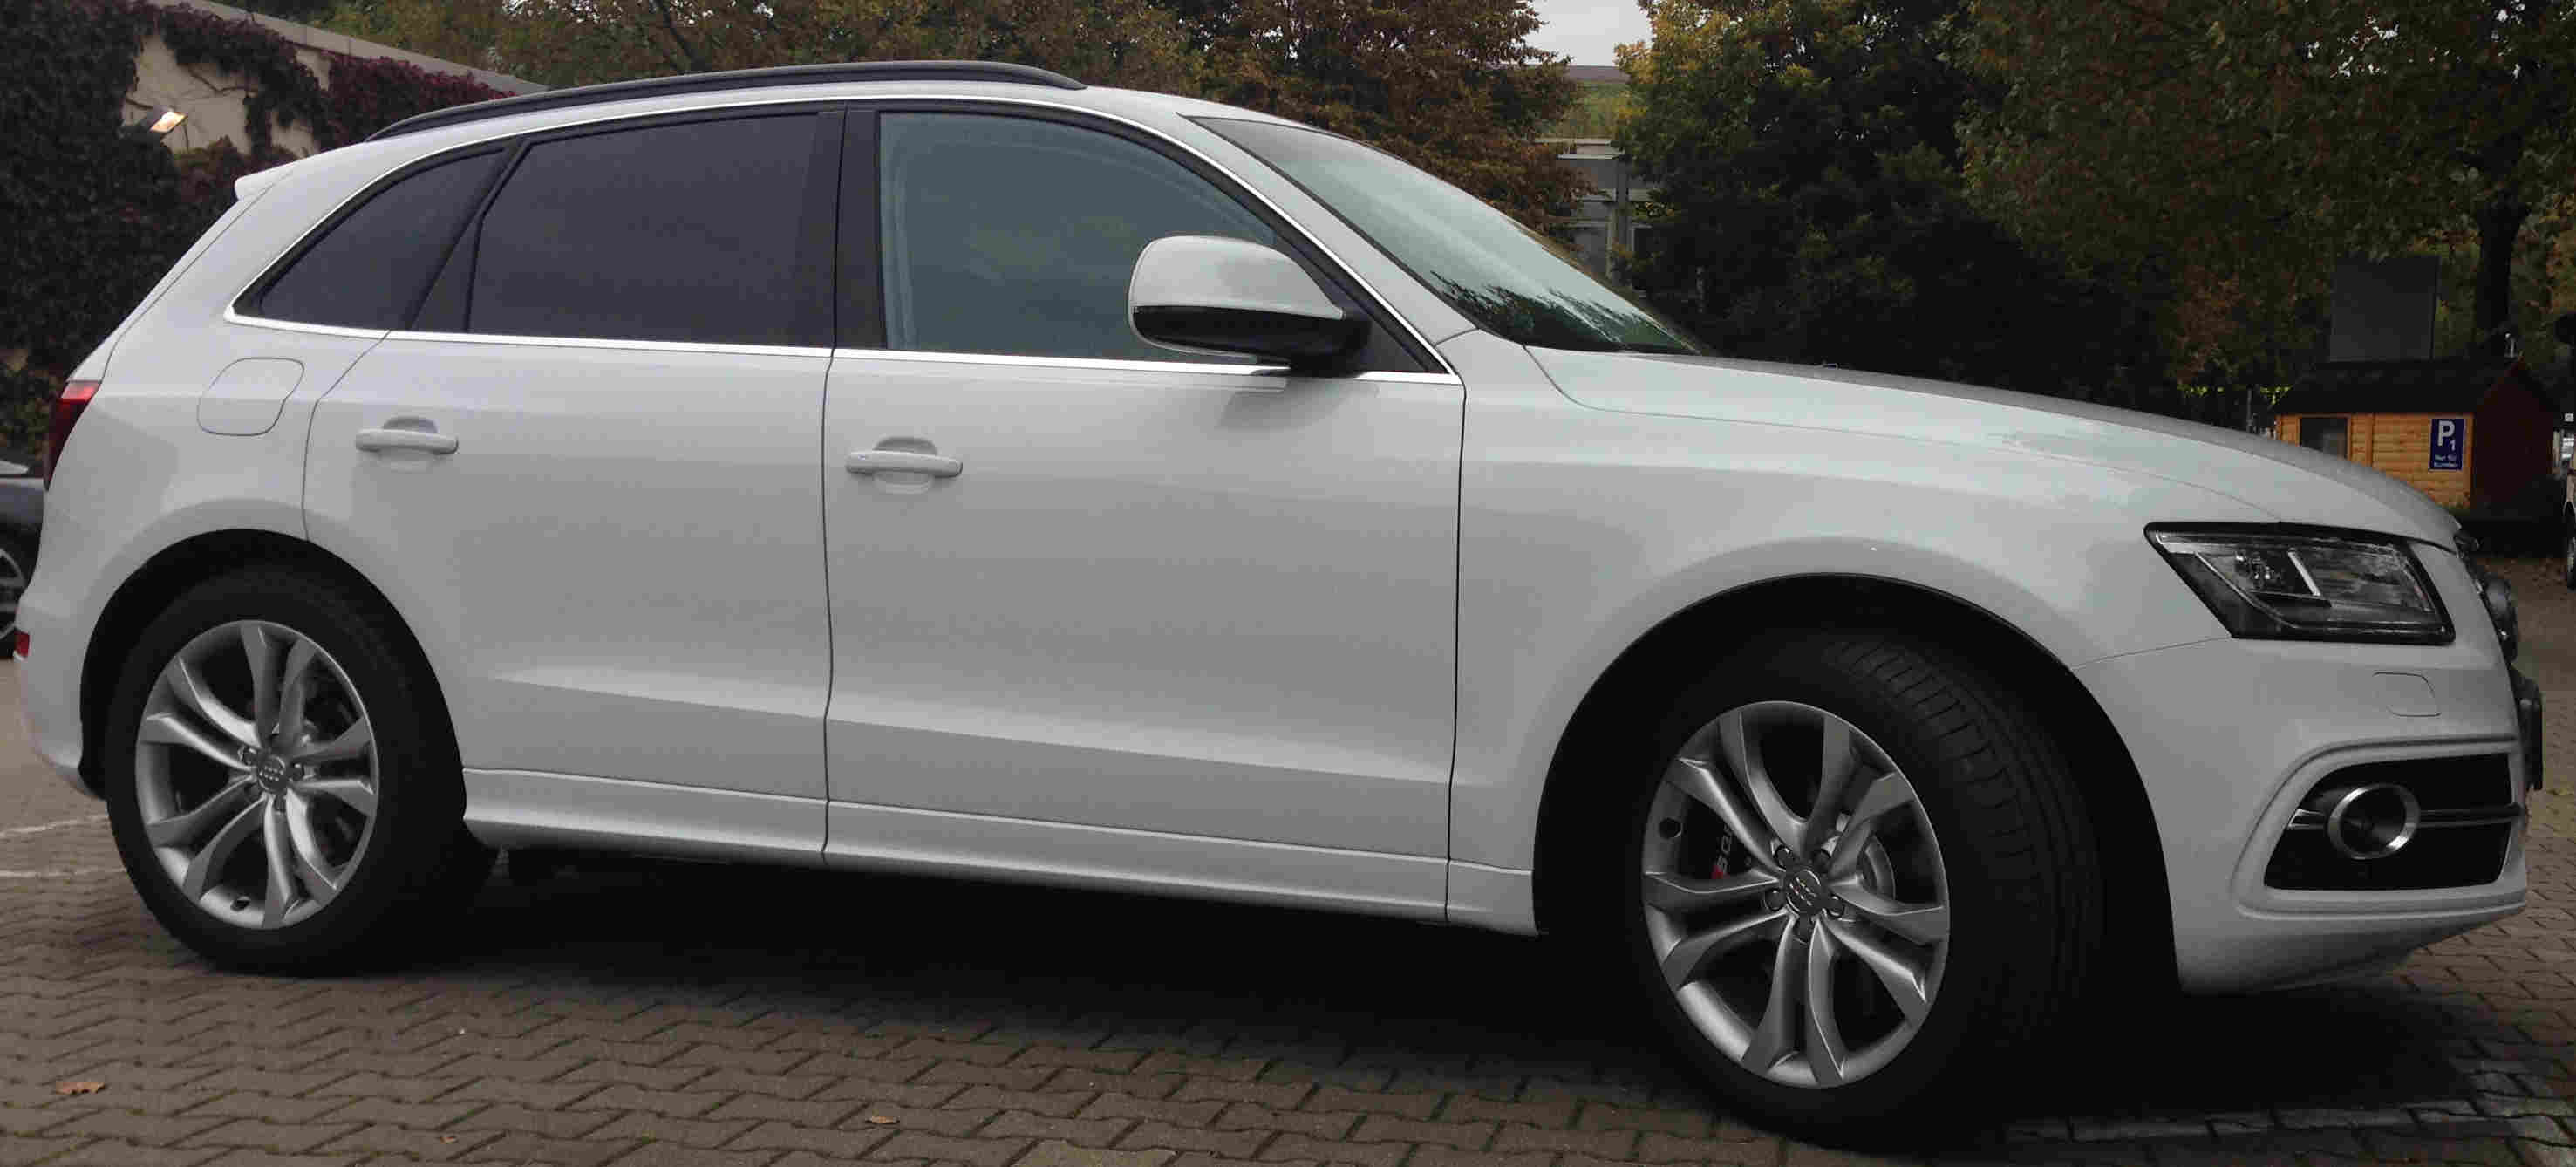 Audi SQ5 mit Extras in weiss